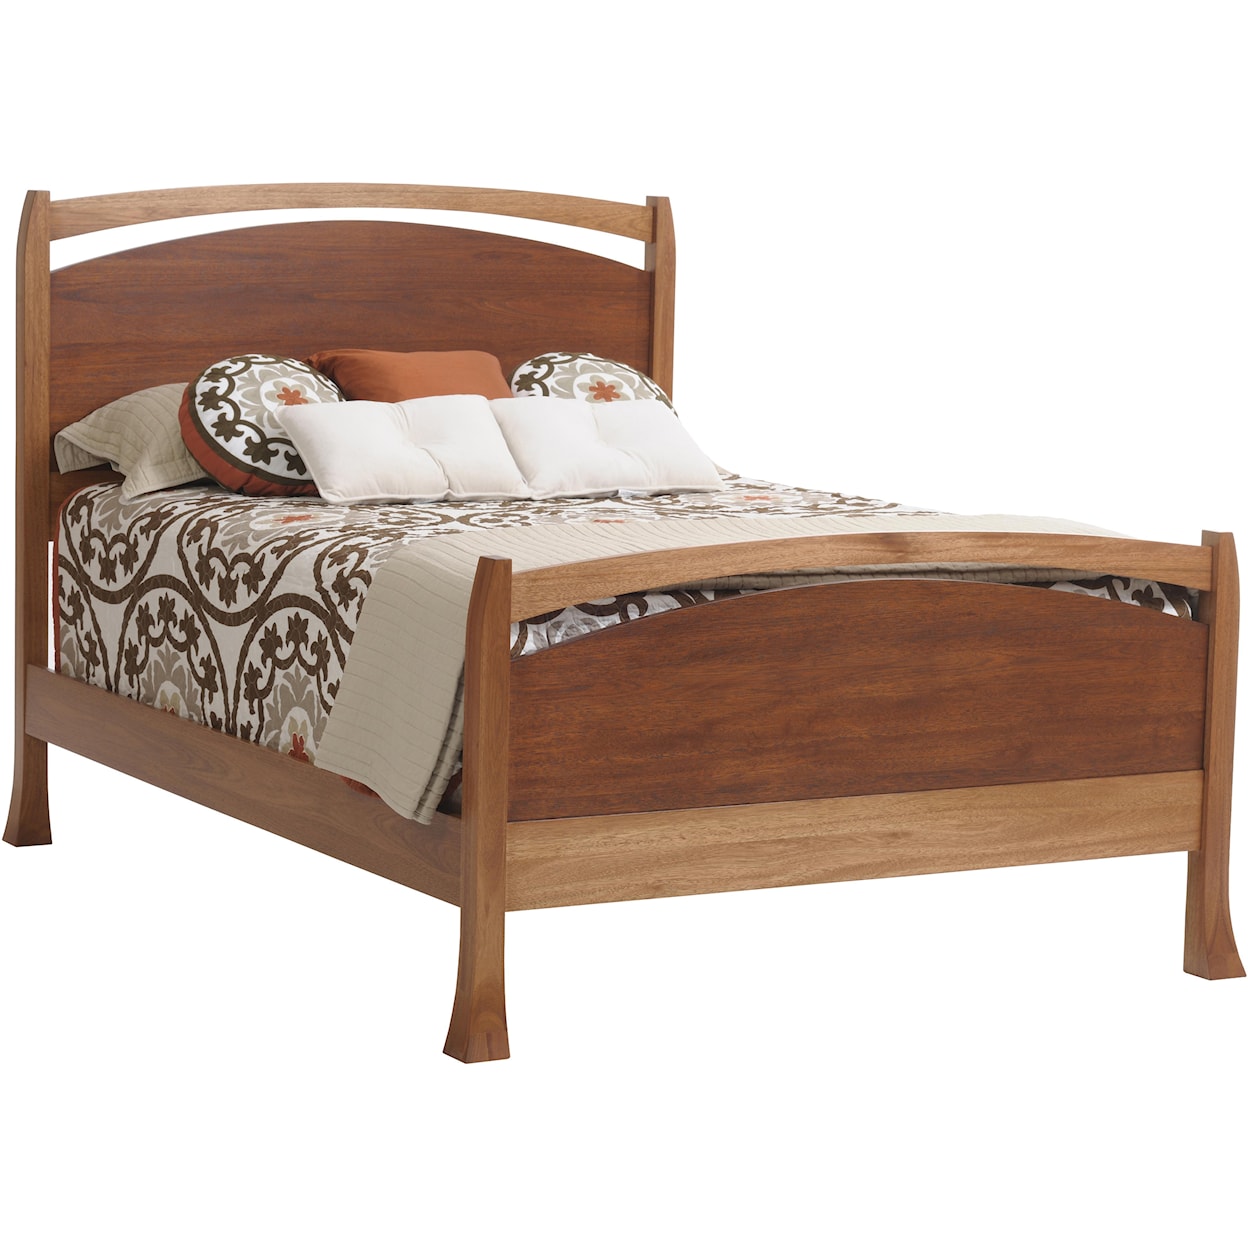 Millcraft Oasis King Panel Bed